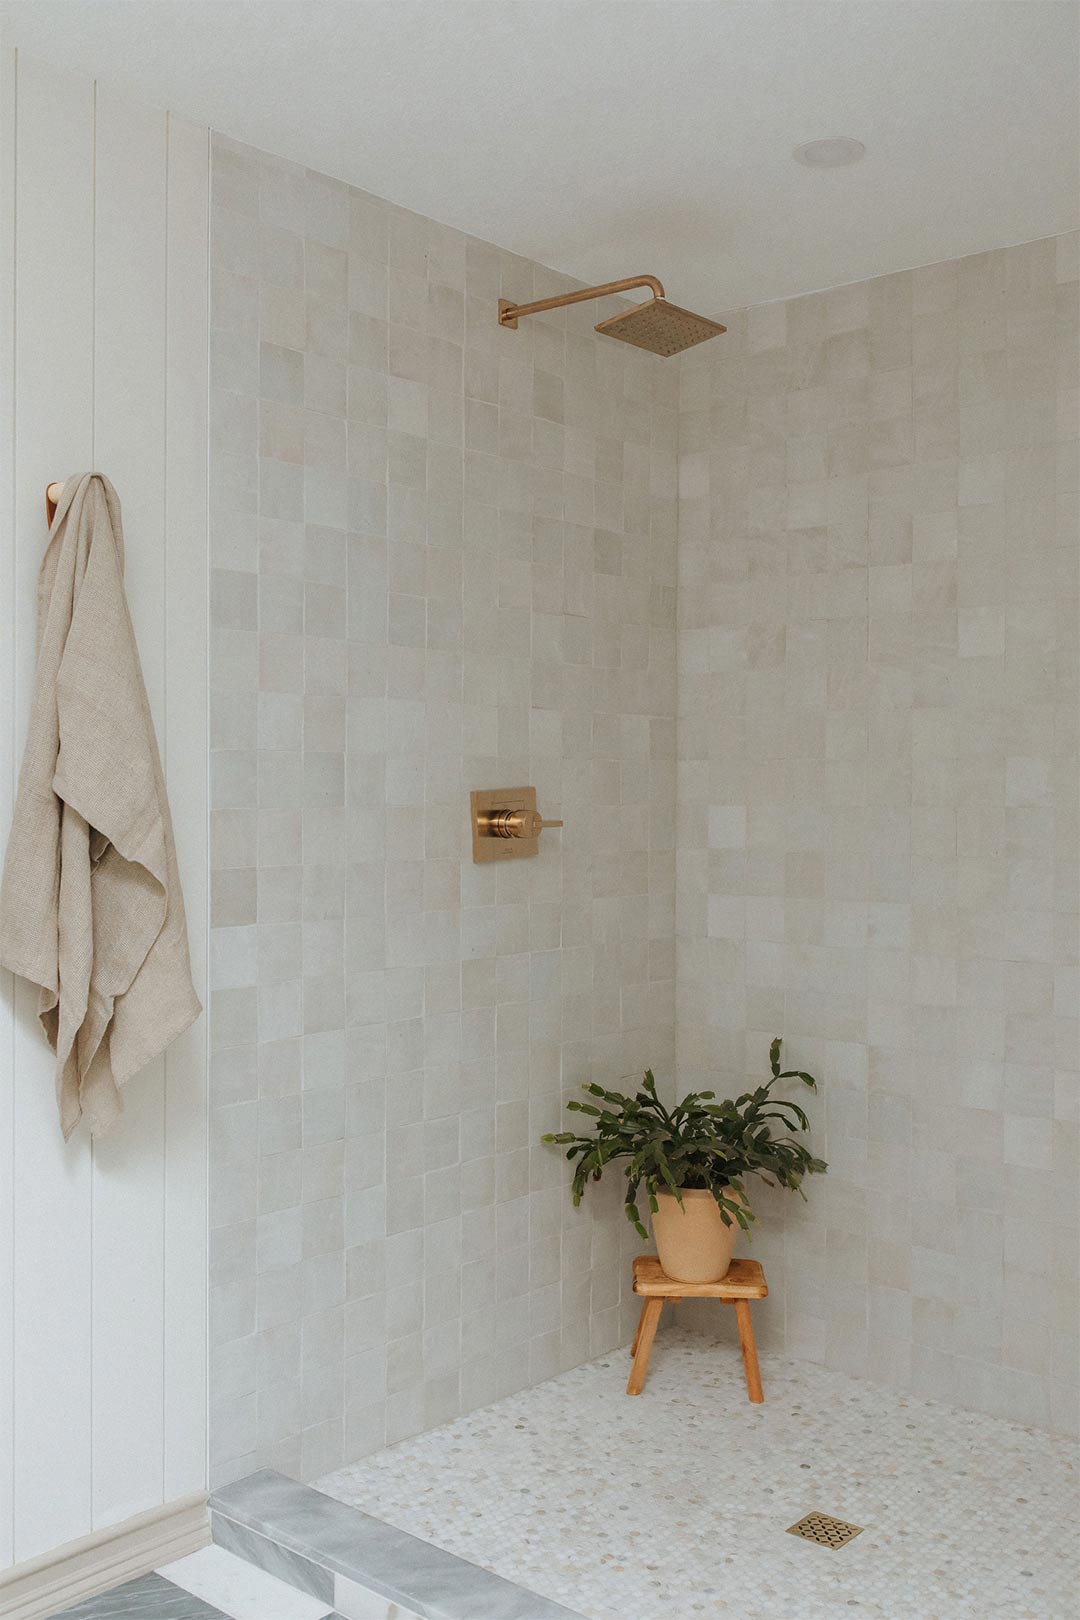 Zagora 2" x 2" Zellige Wall Tile - in a walk in shower with brass faucet and a Vintage Wood Milking Stool with a plant in the shower styled by Jennifer Murphy of J. Reiko Design + Co